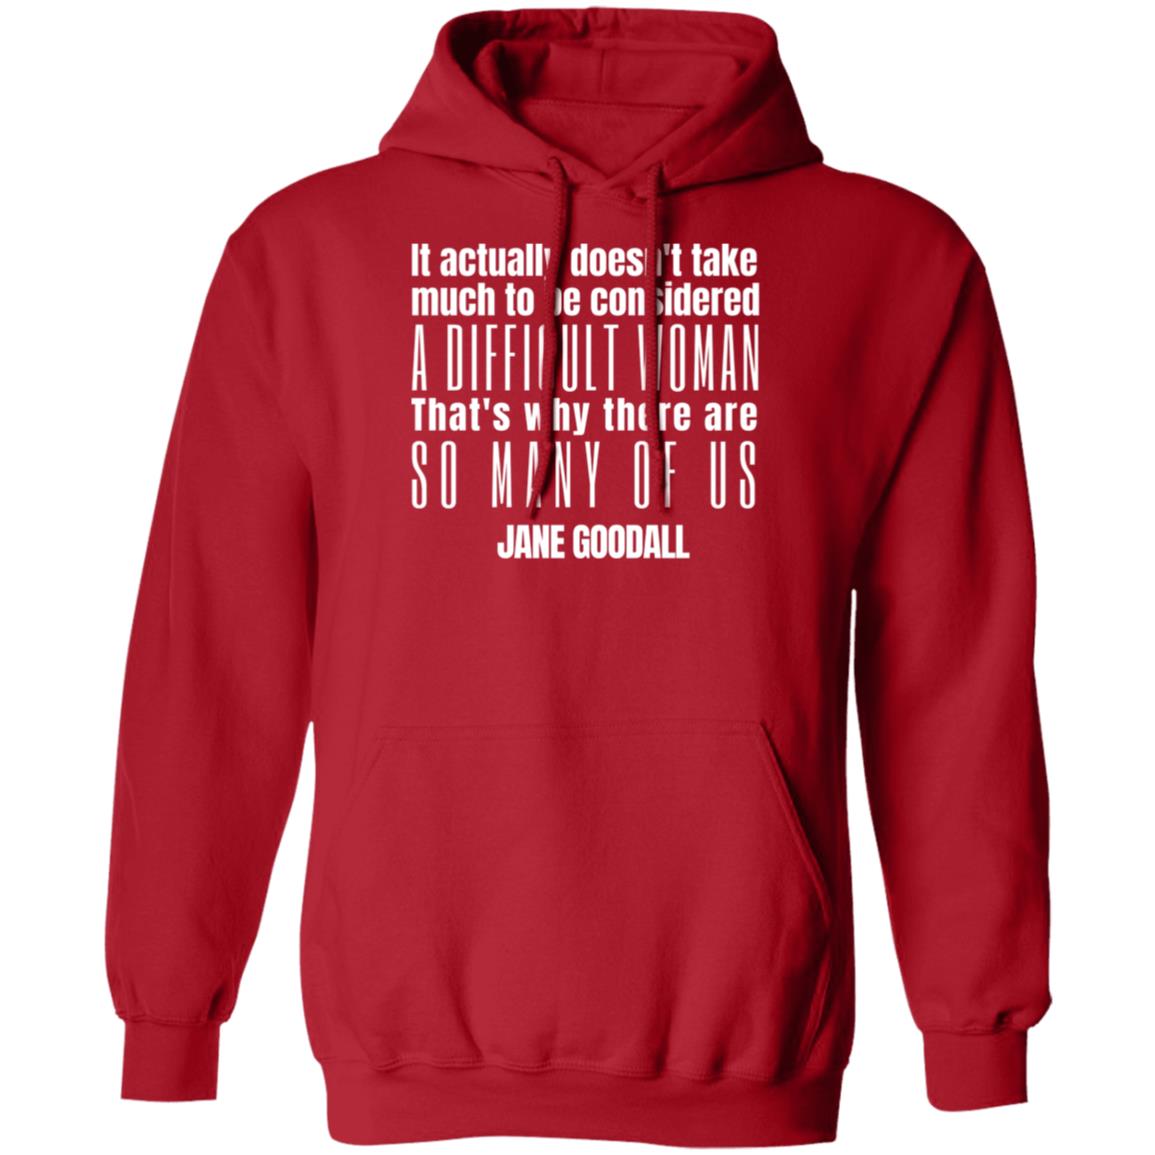 Jane Goodall Difficult Woman Quote Hooded Sweatshirt